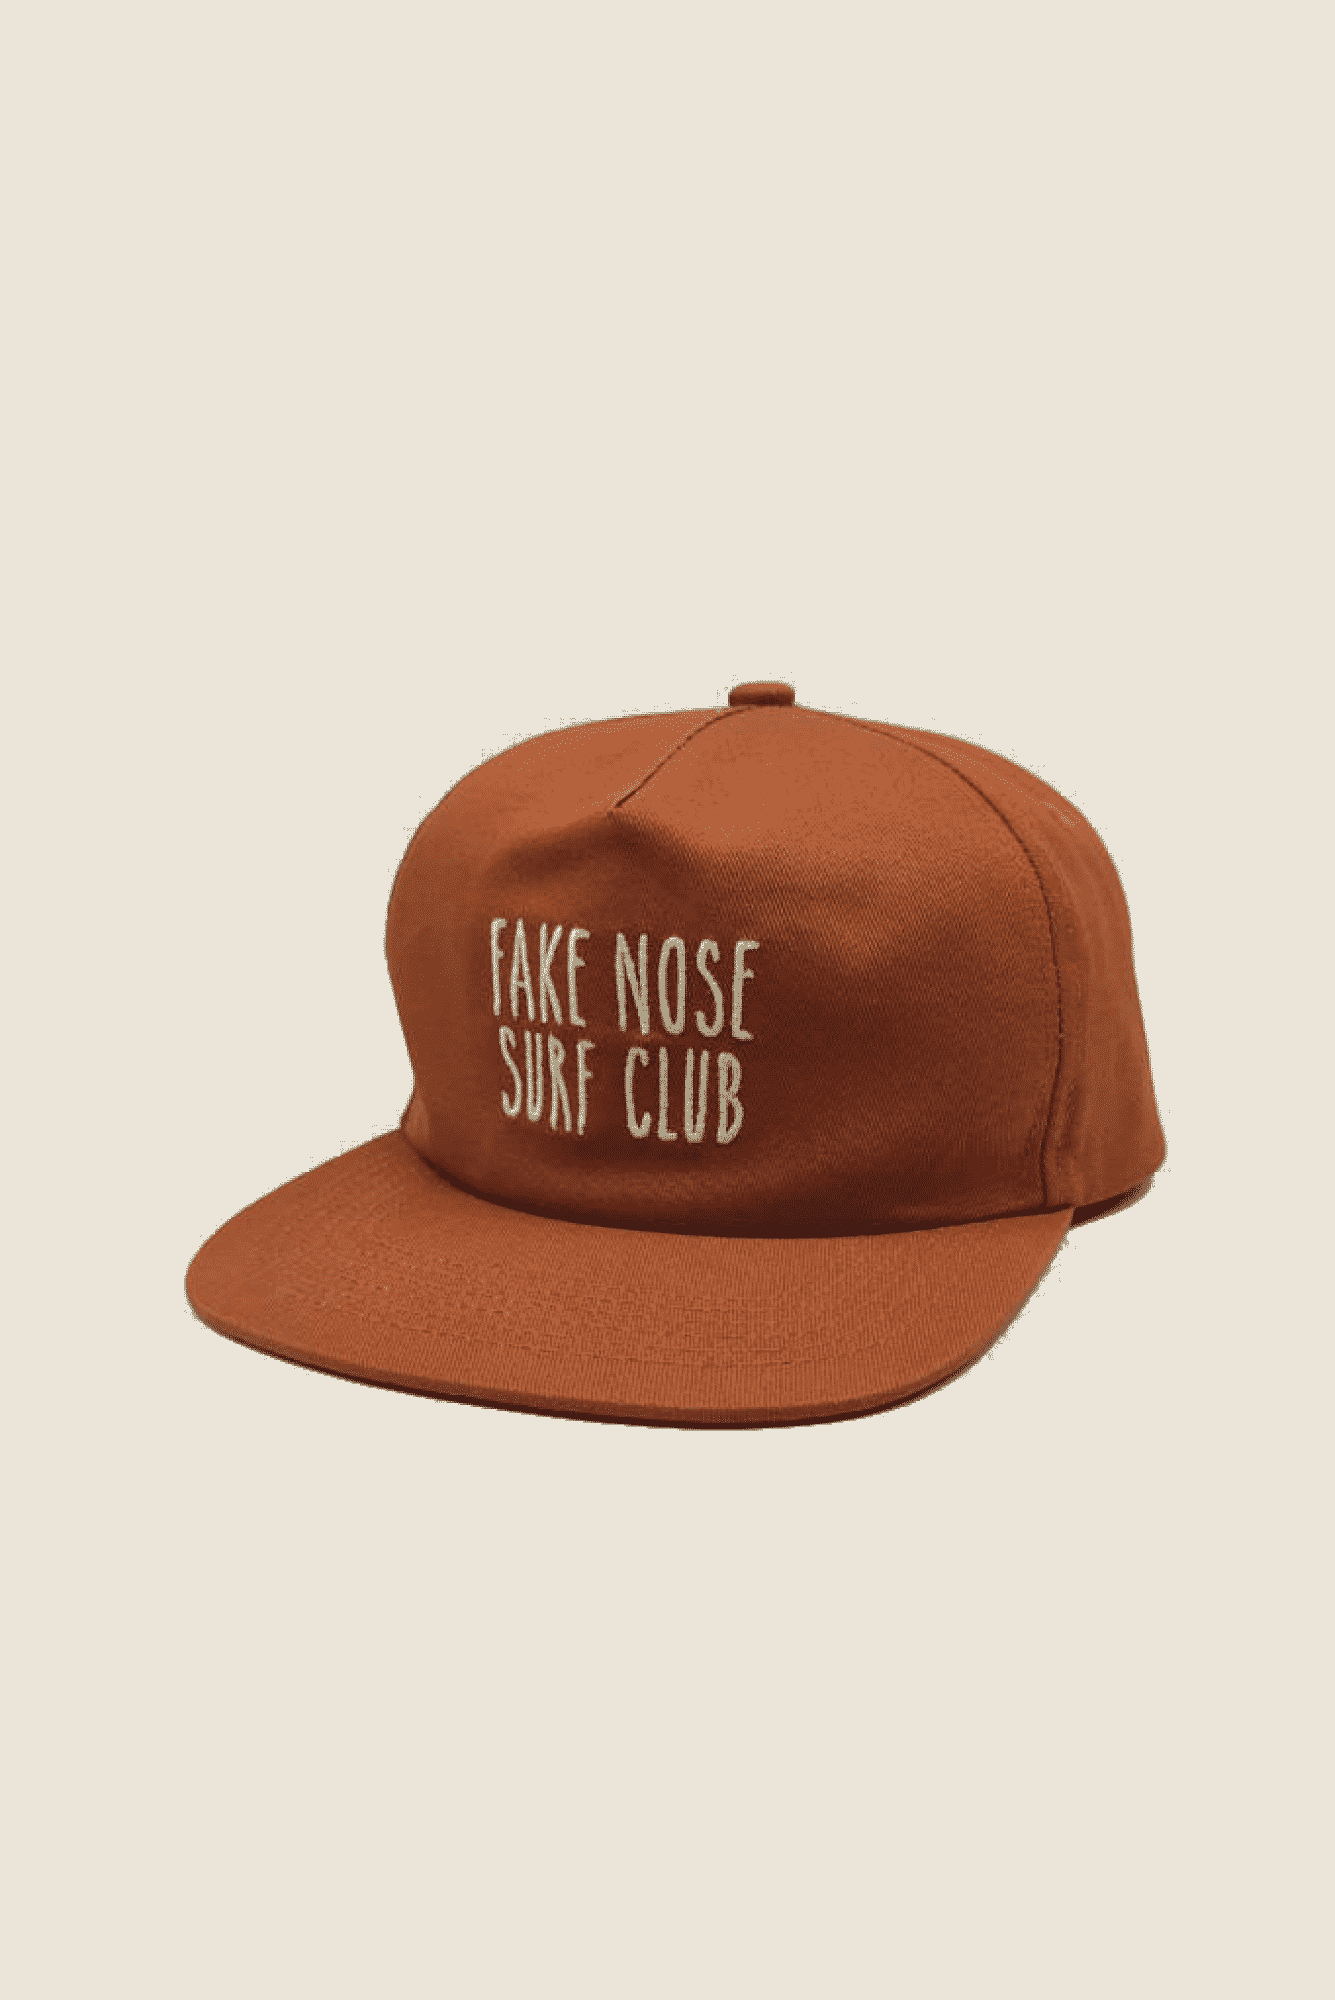 CASQUETTE_6_PANEL_FAKE_NOSE_SURF_CLUB_SS22_CHIPIRON_SURFBOARDS